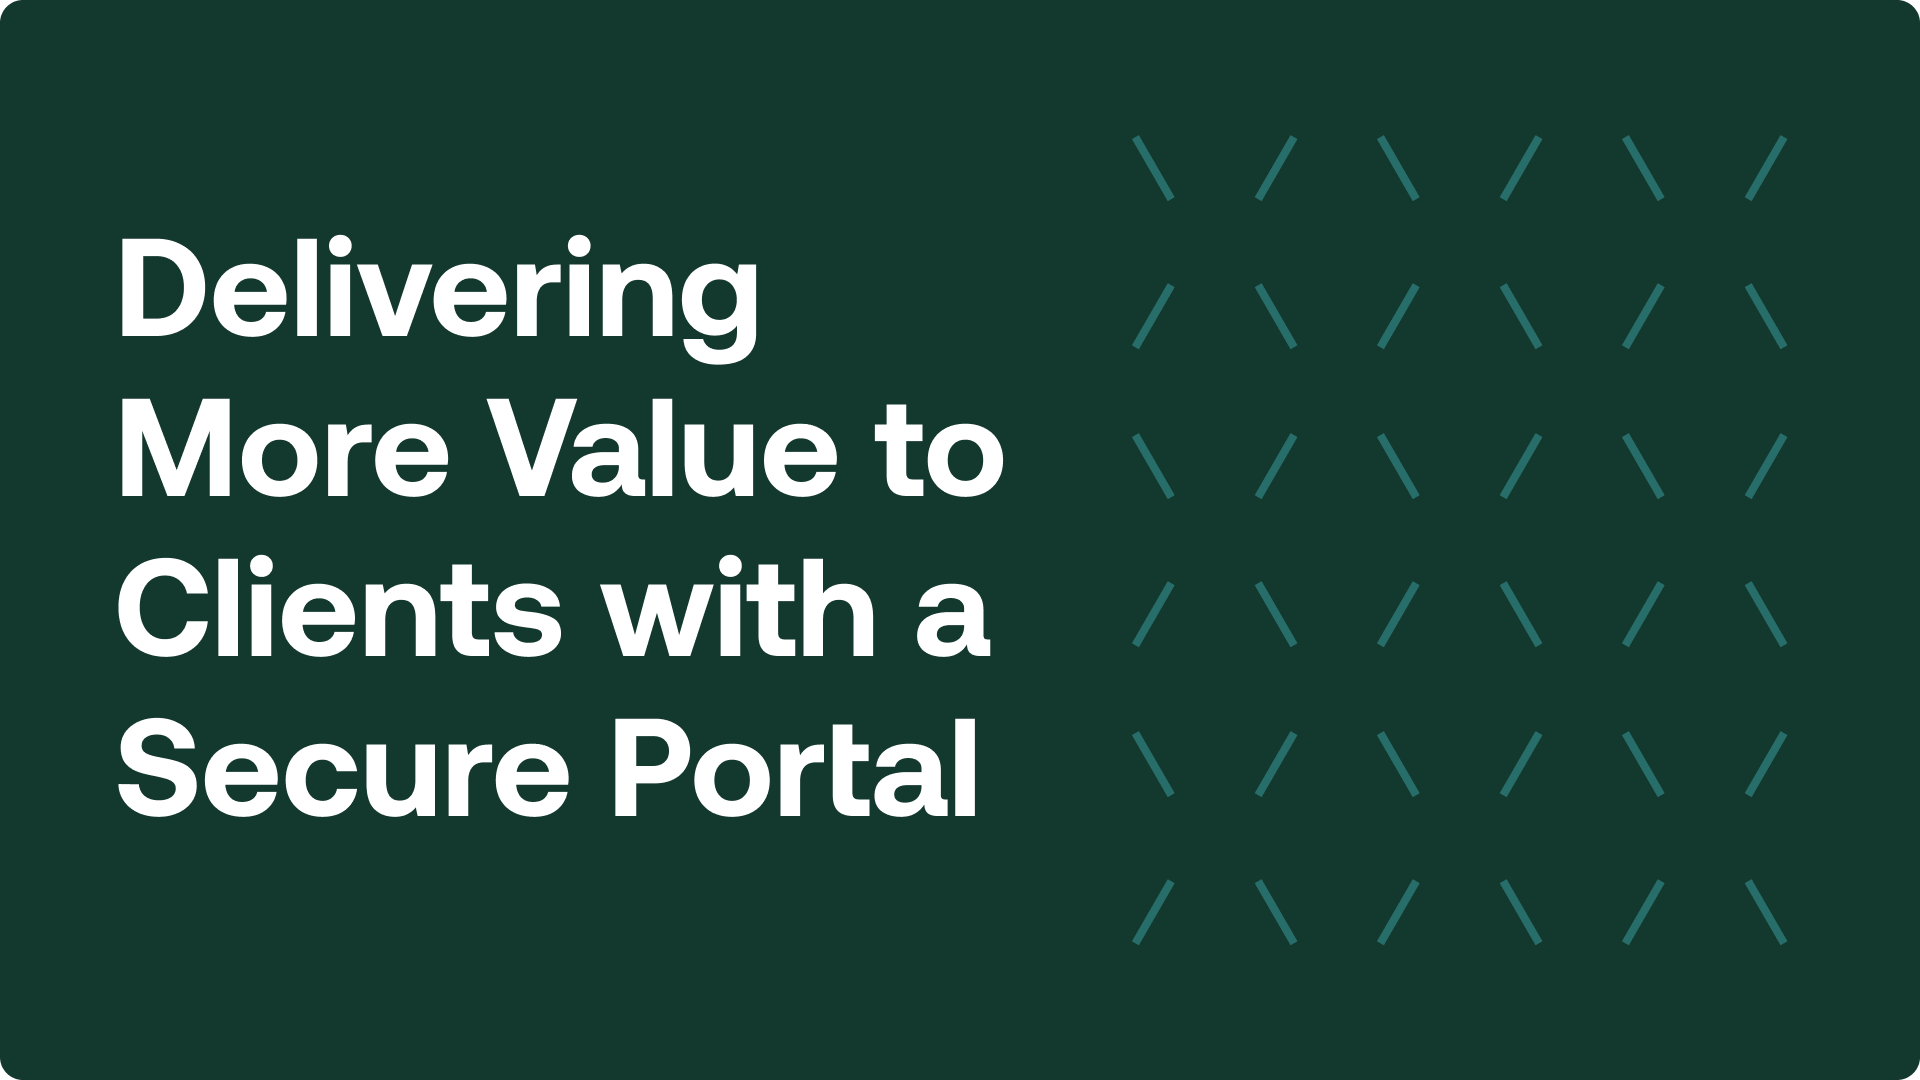 Delivering more value to clients with a secure portal